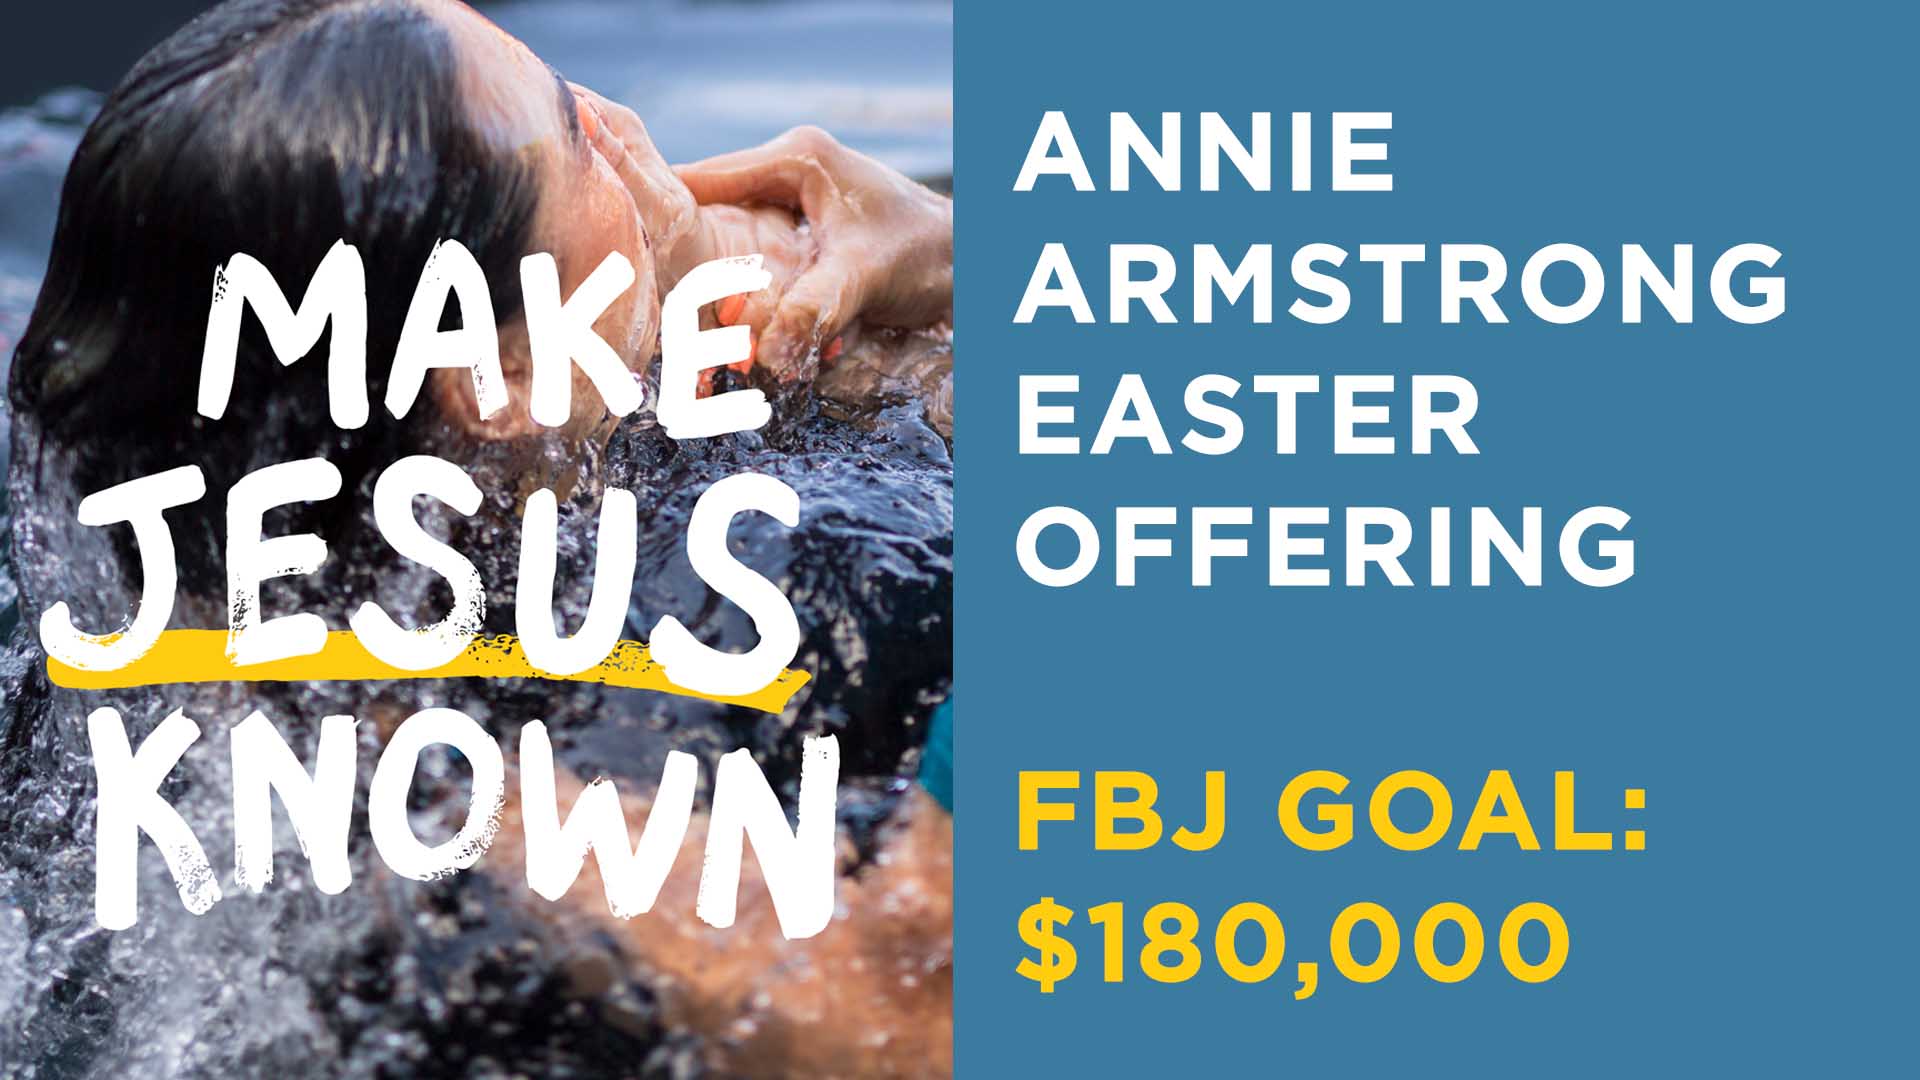 Annie Armstrong Easter Offering Graphic with FBJ Goal of $180,000